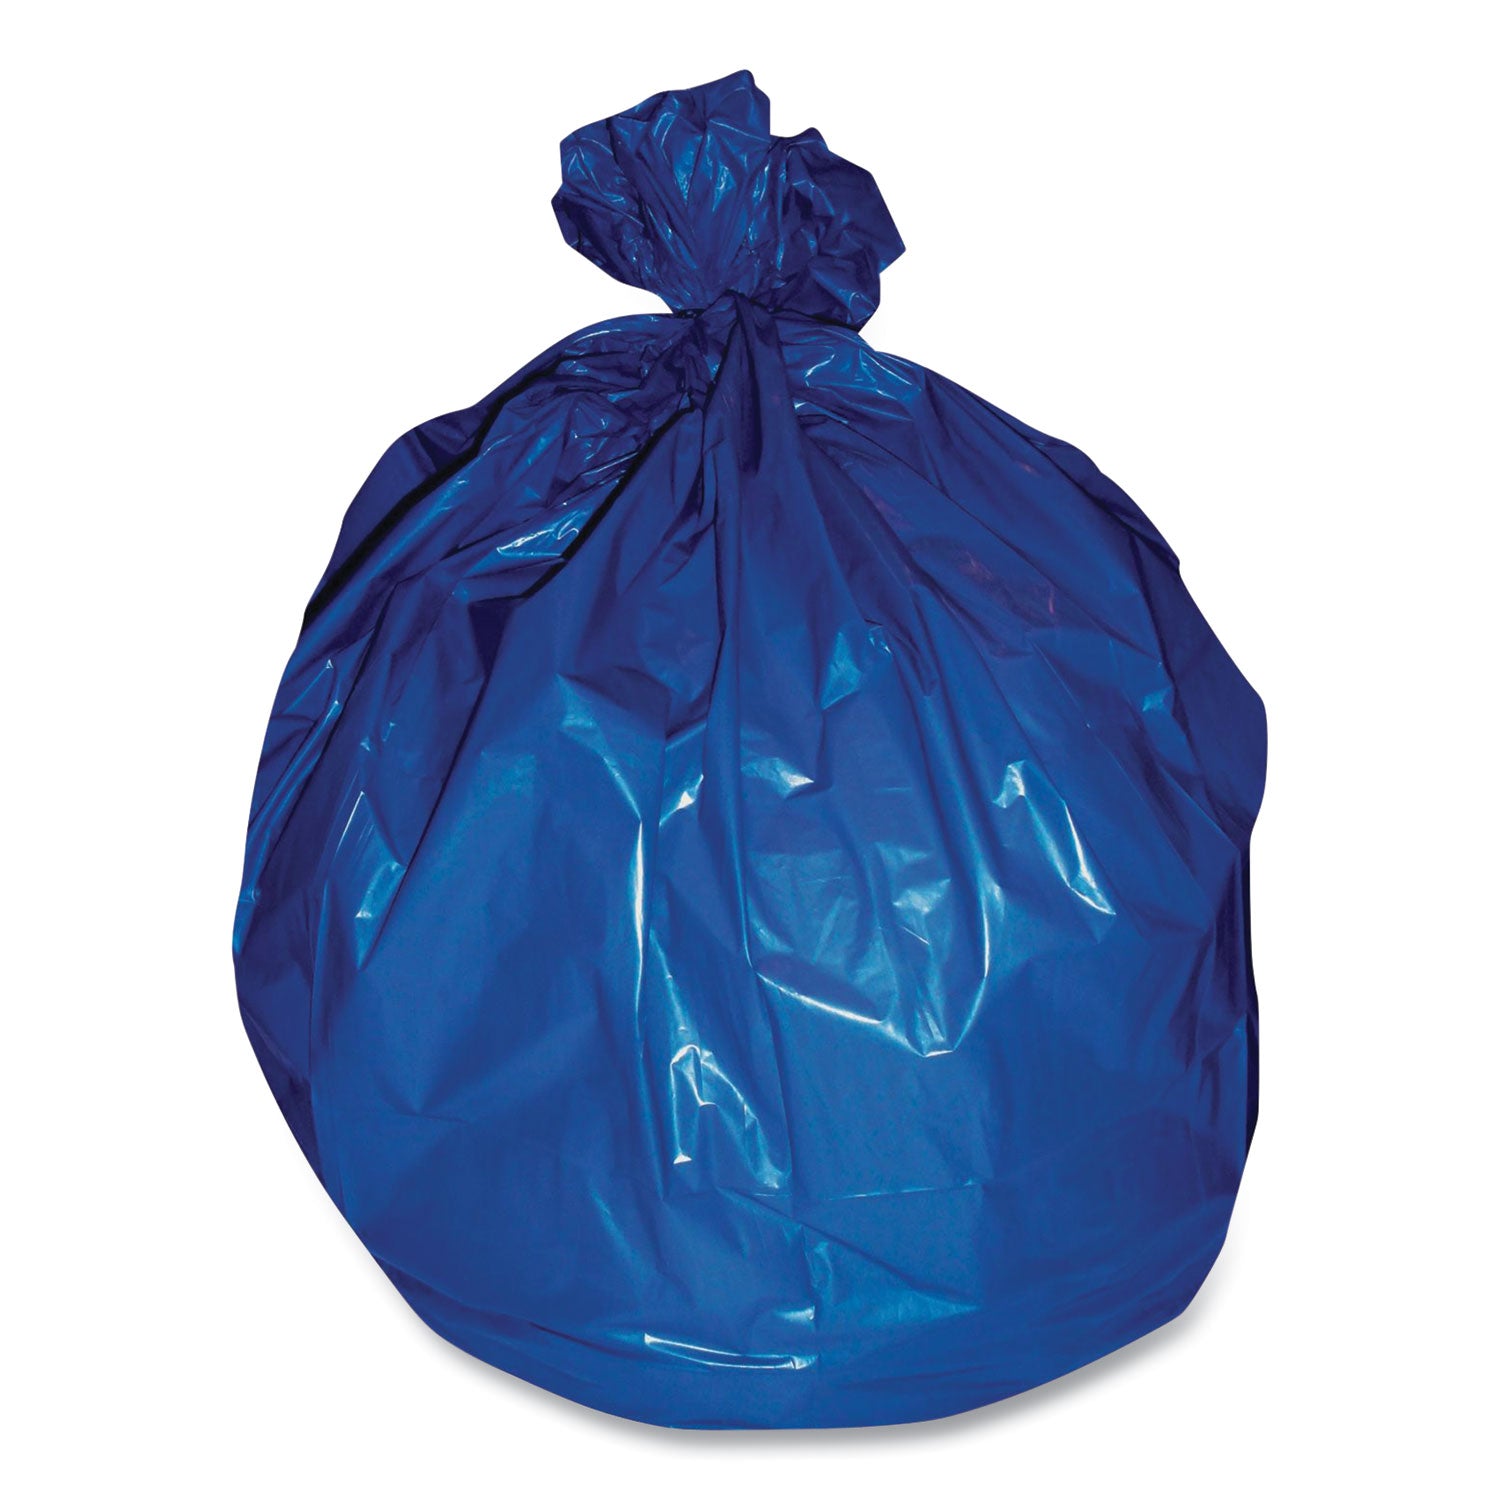 high-density-can-liners-45-gal-16-to-20-mic-40-x-48-blue-25-bags-roll-8-rolls-carton_cwz657093 - 1